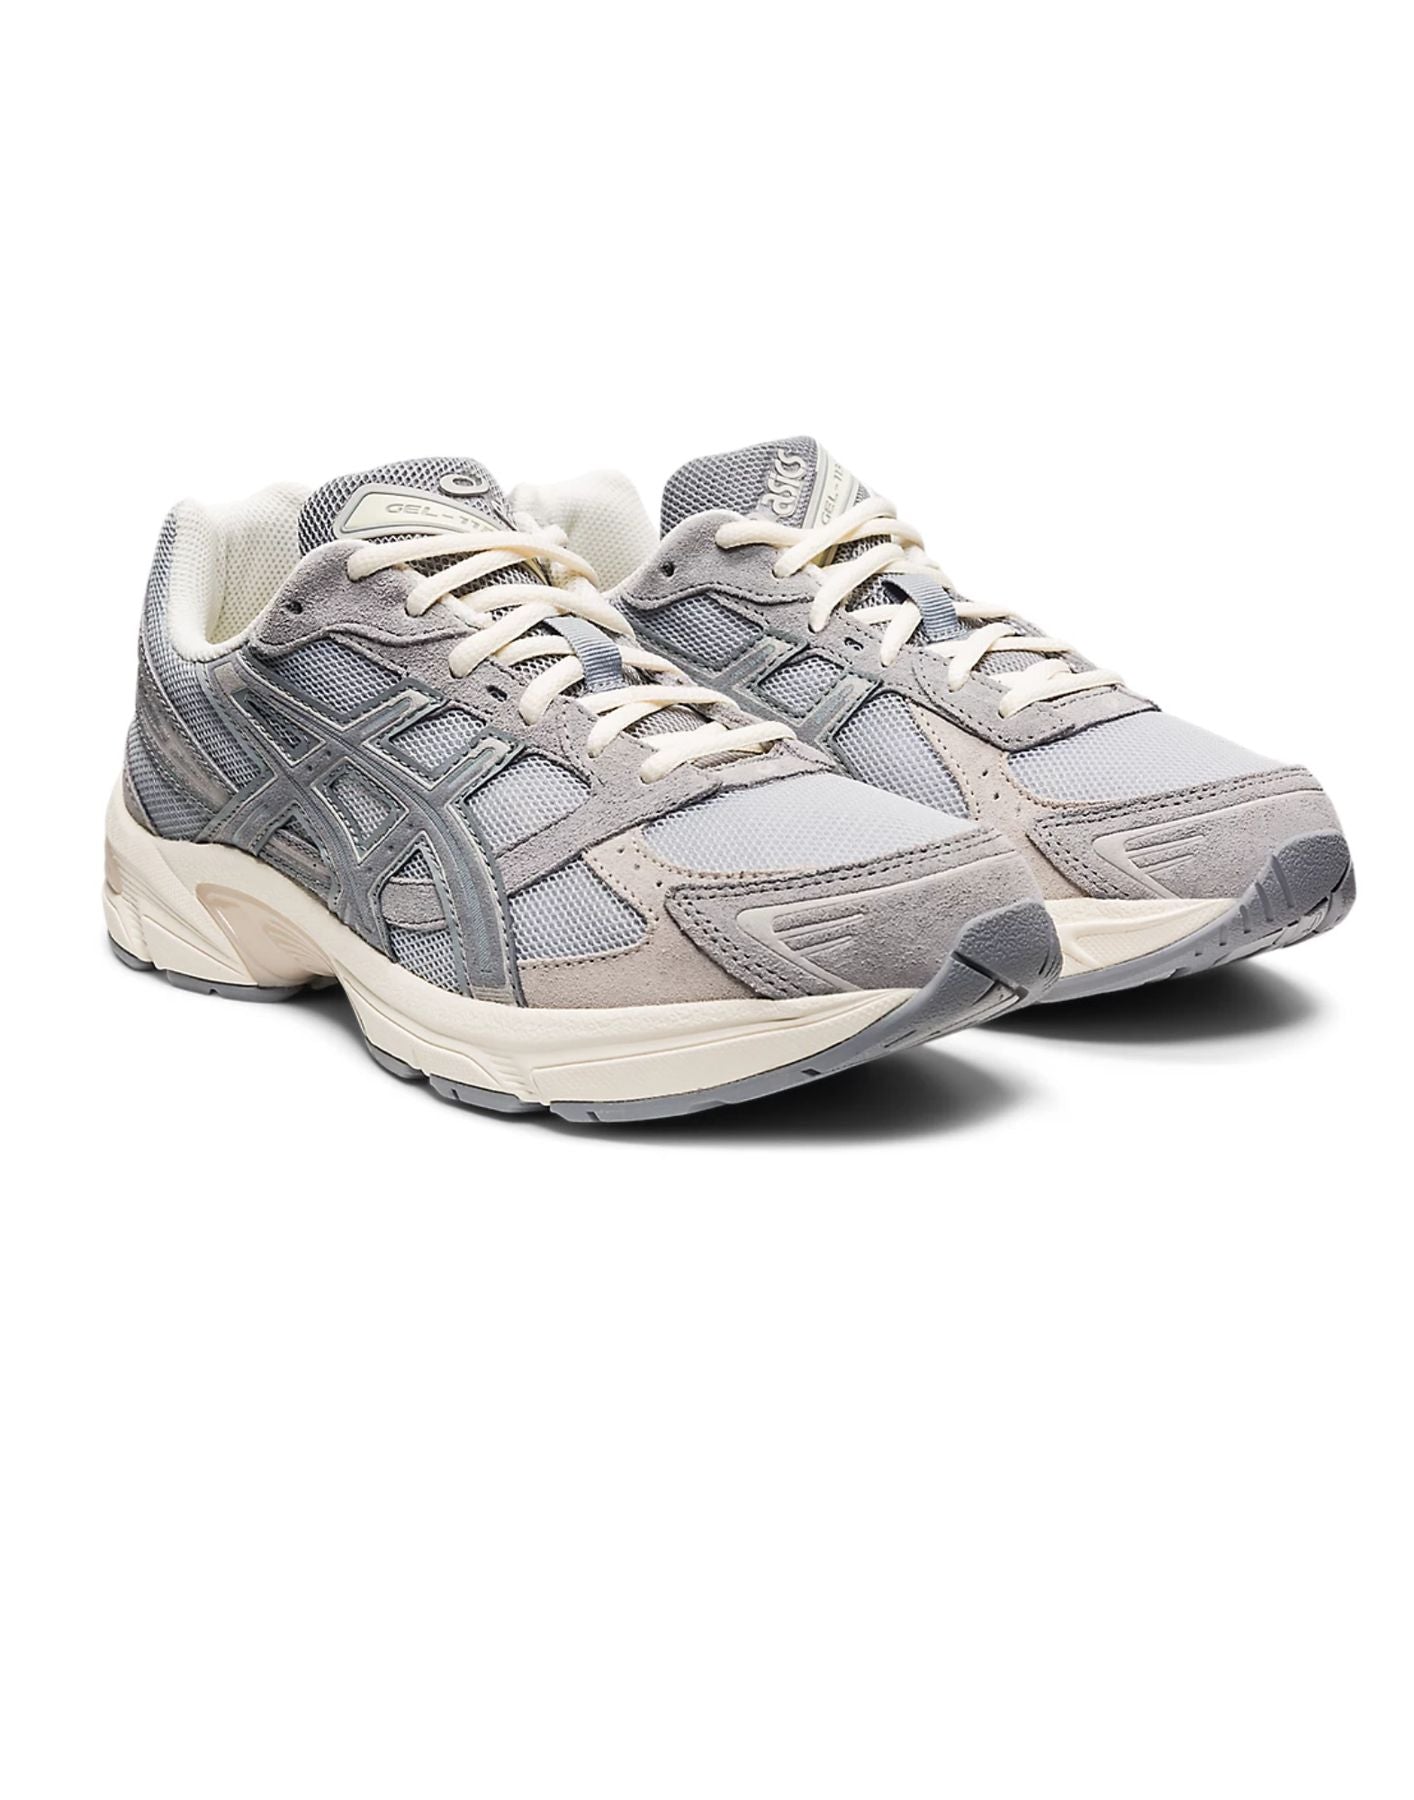 Shoes for man 1201A255-022 M ASICS